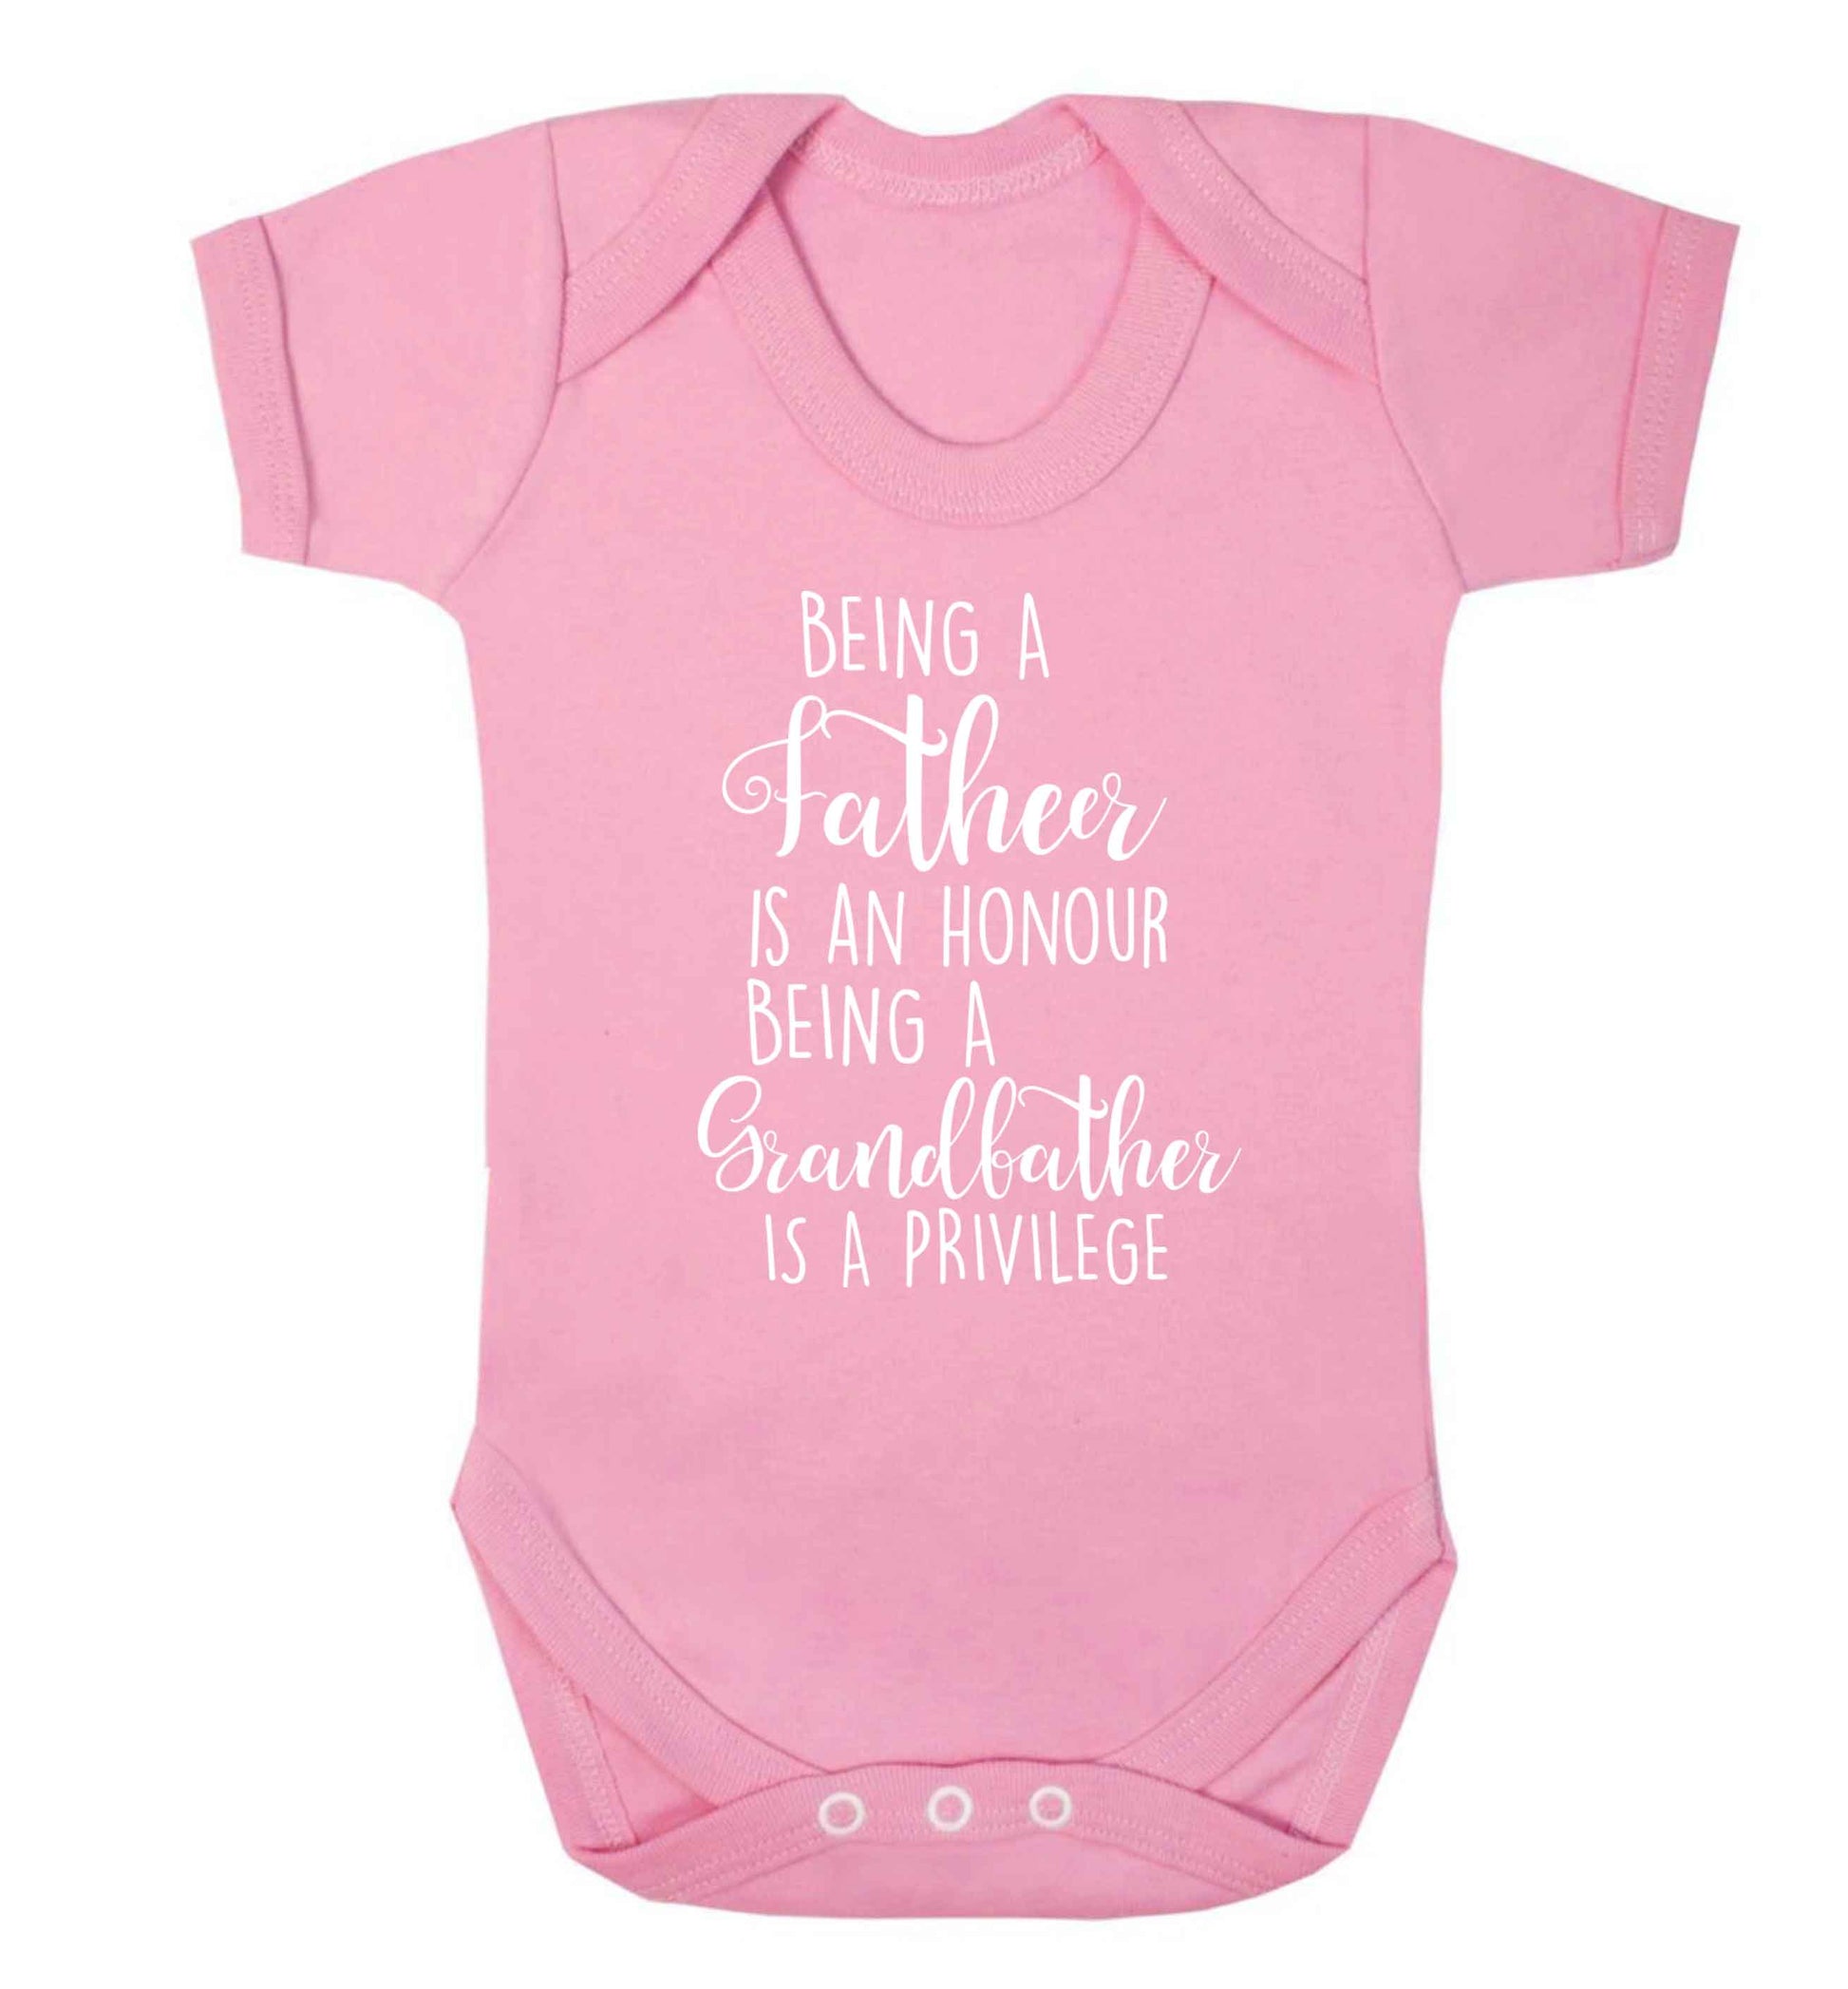 Being a father is an honour being a grandfather is a privilege Baby Vest pale pink 18-24 months